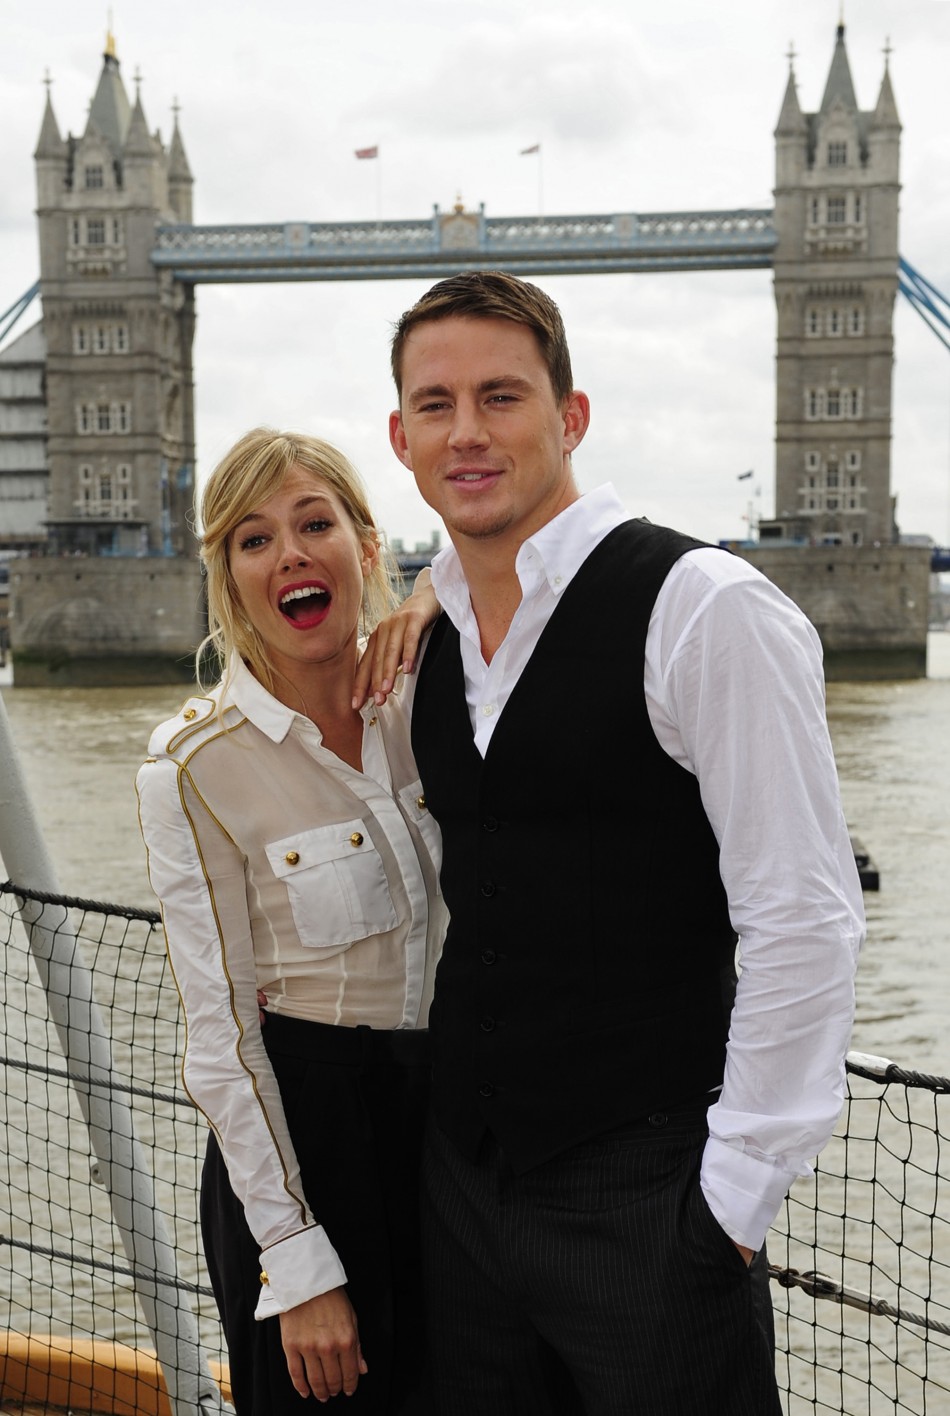 British actress Sienna Miller and U.S. actor Channing Tatum pose for photographers during a photocall to promote their new film G.I. Joe, in front of Tower Bridge, on HMS Belfast on the River Thames in London